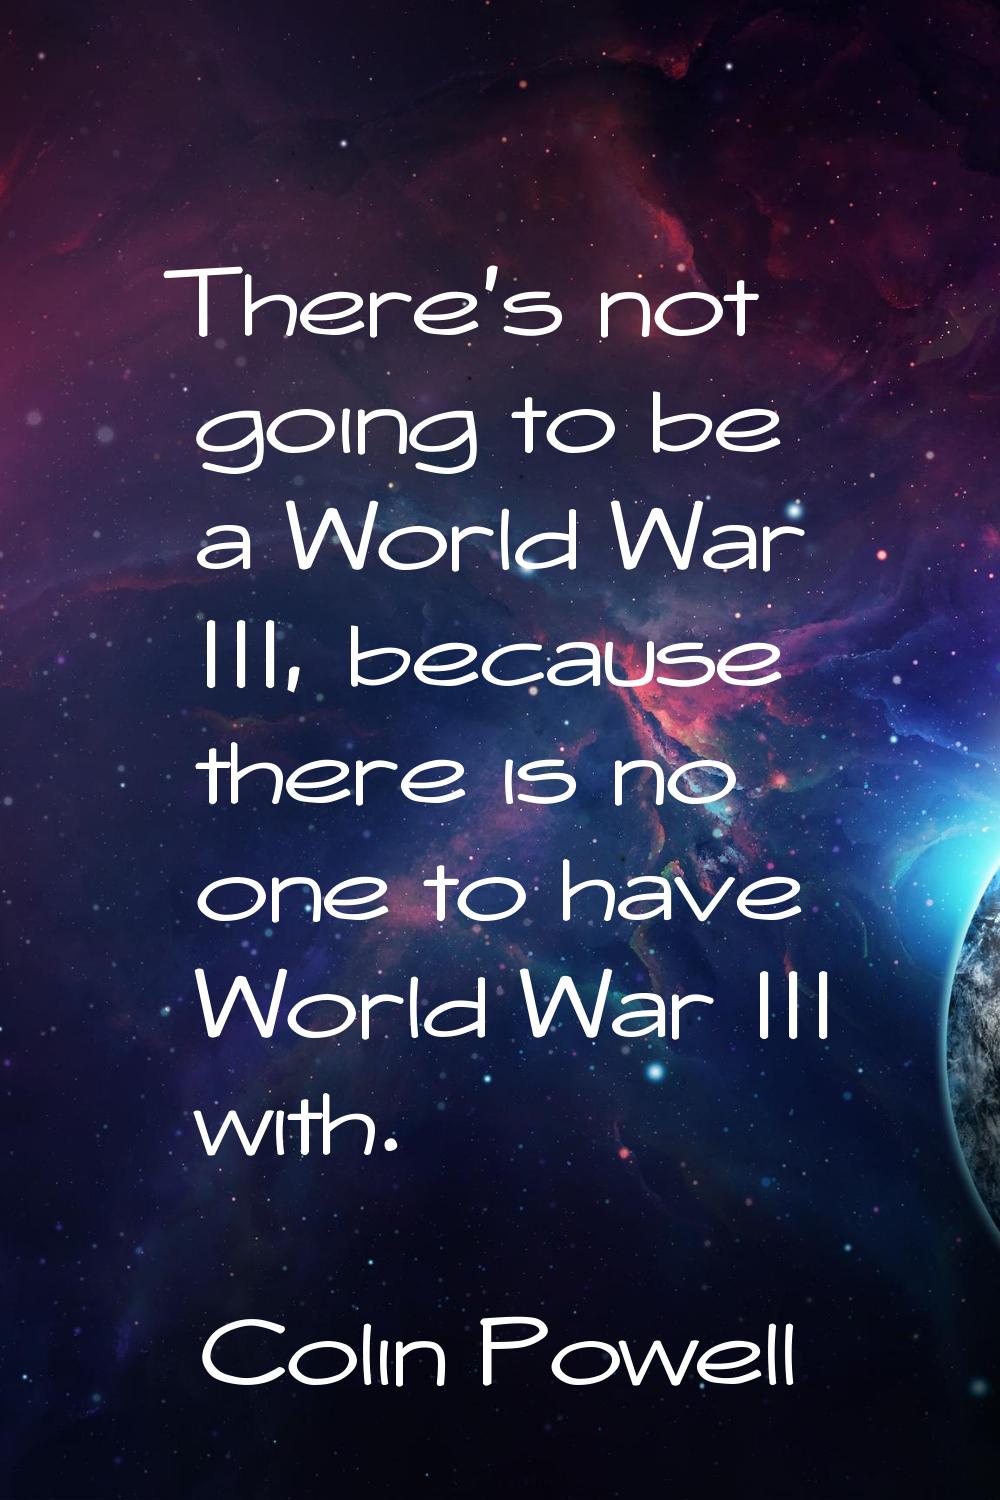 There's not going to be a World War III, because there is no one to have World War III with.